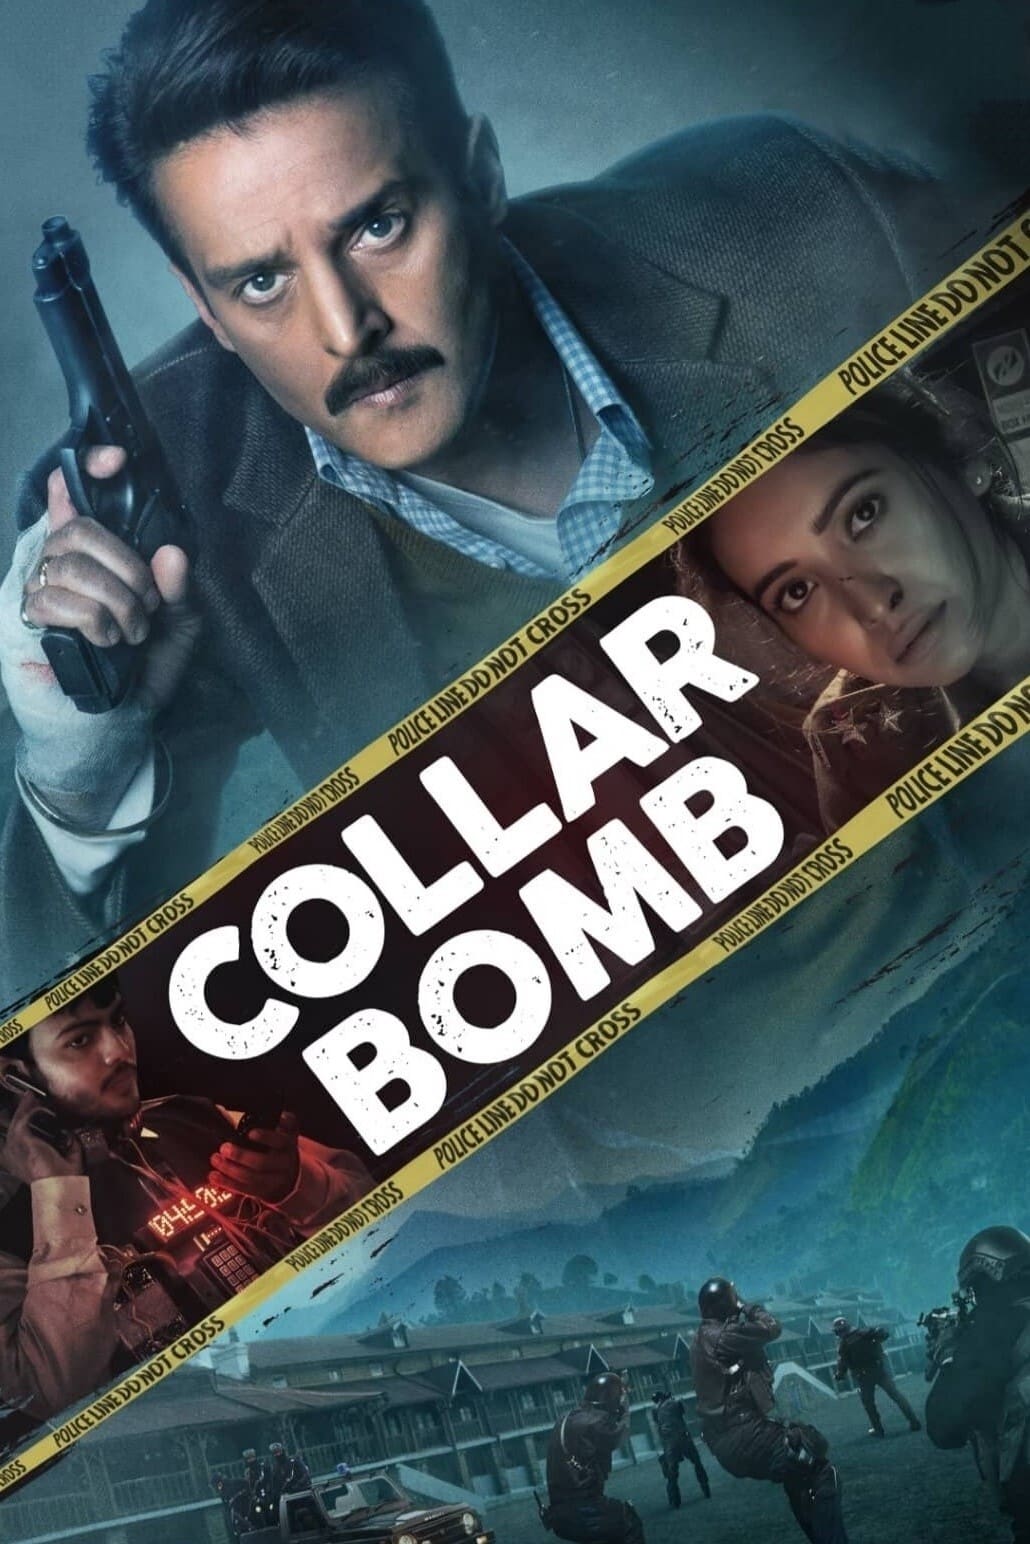 Poster for the movie "Collar Bomb"